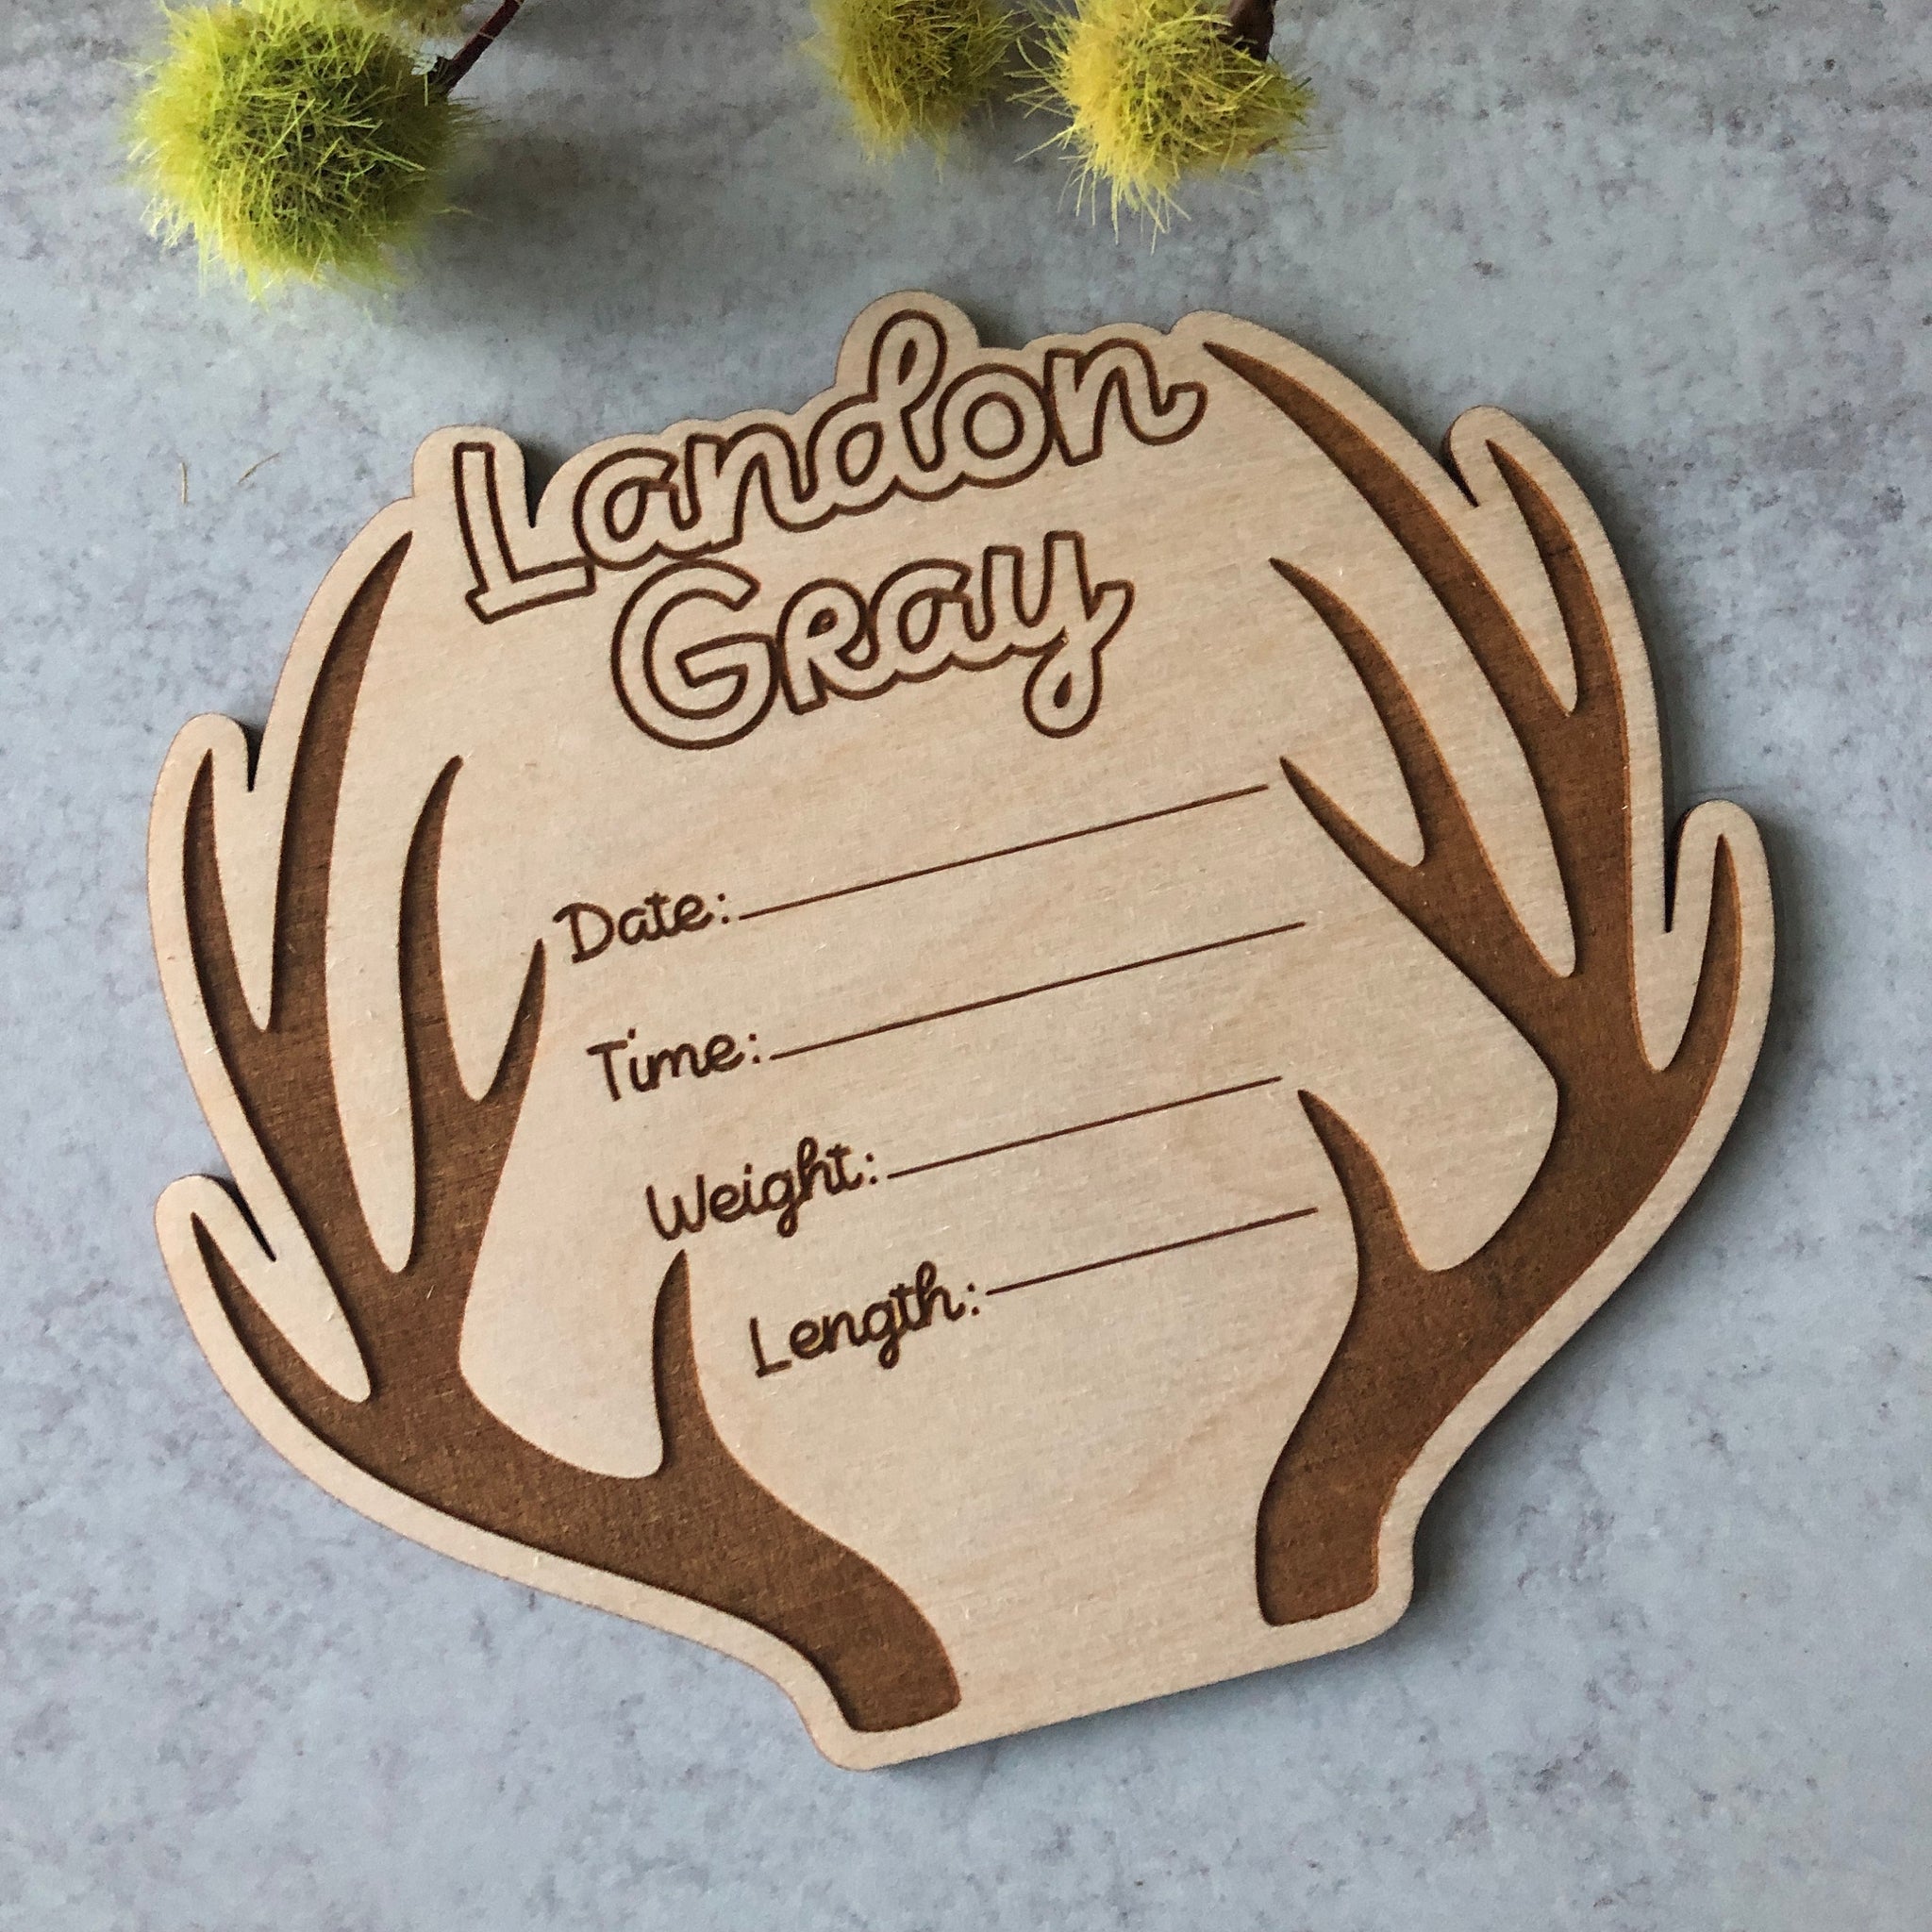 Birth Announcement Sign, Wood Name Sign, Engraved Baby Name Sign, Newborn Photo Prop, Deer Nursery Decor - Birth Announcement - Deer Antler